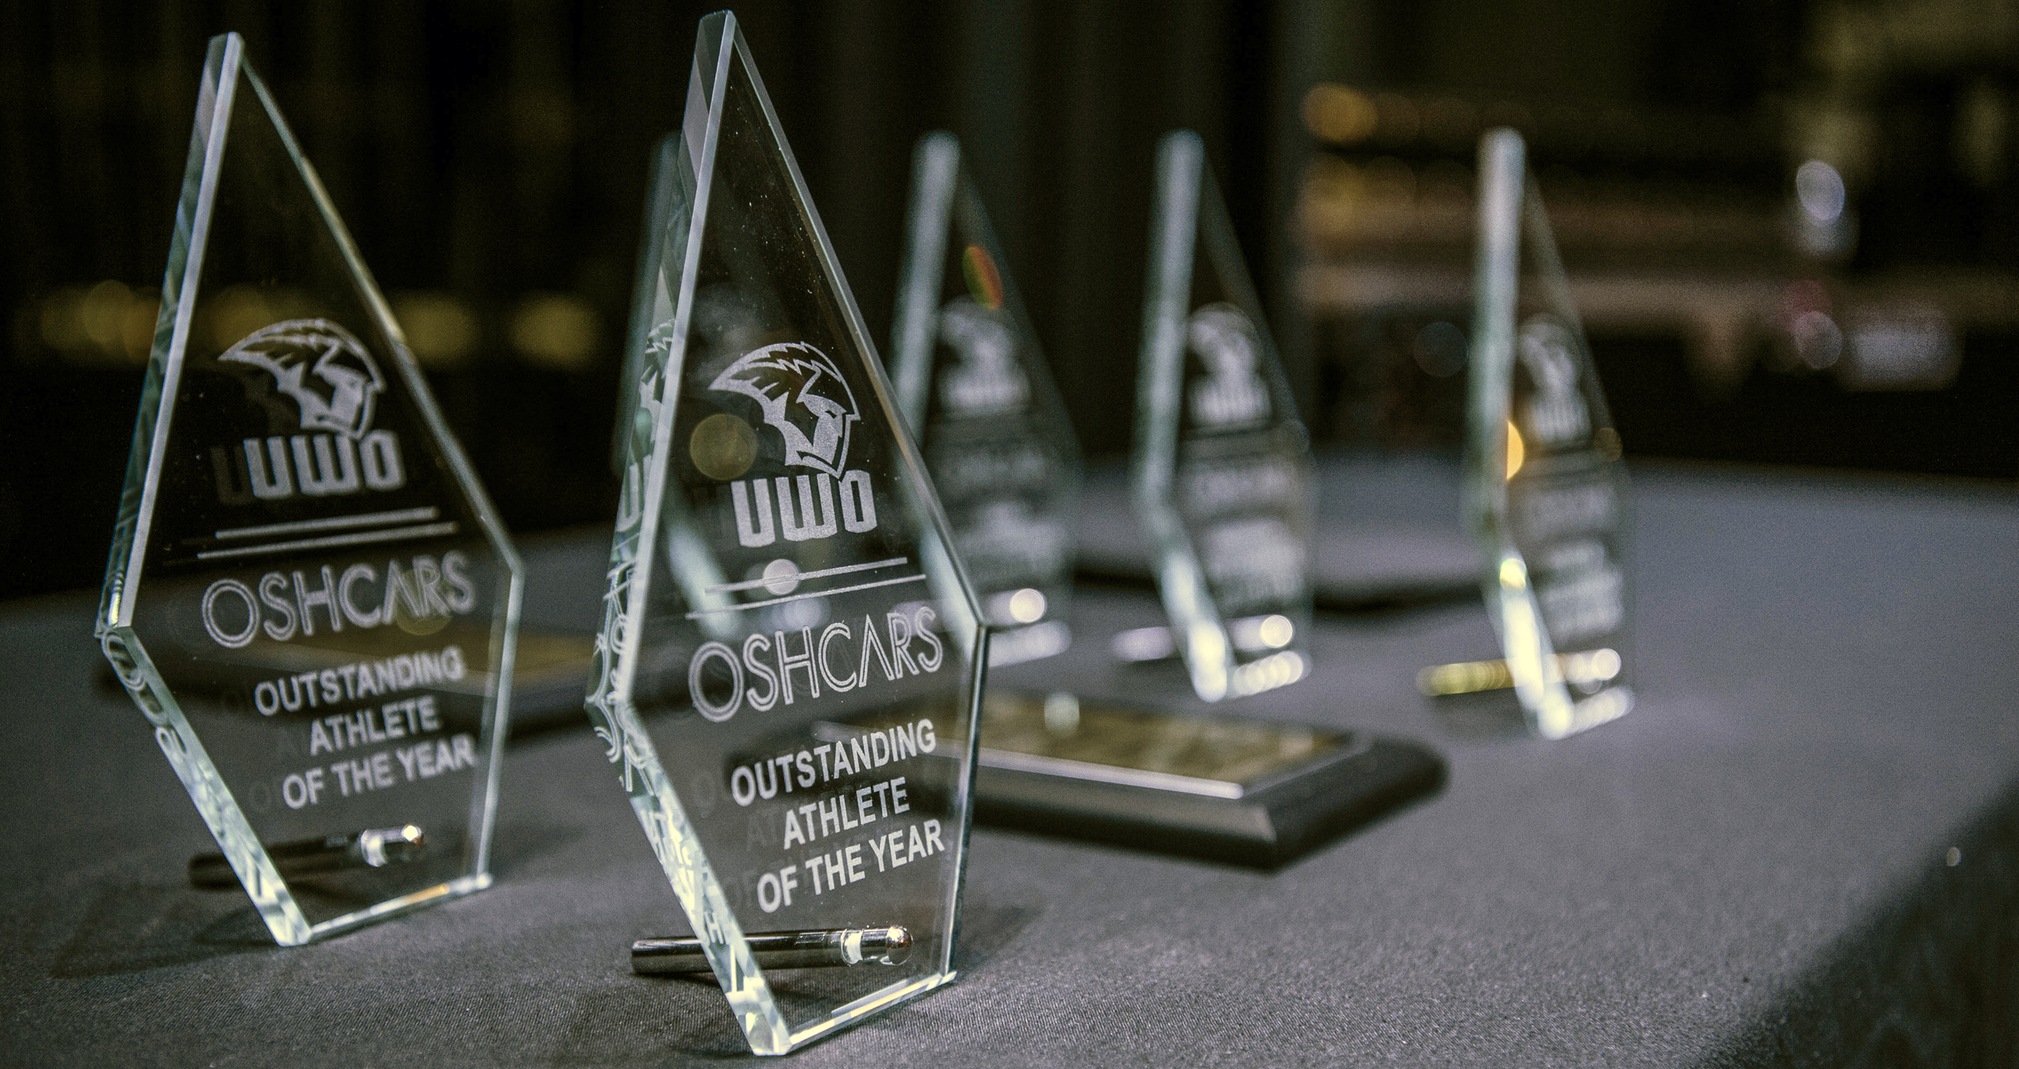 Third Annual Oshcars Award Winners To Be Announced